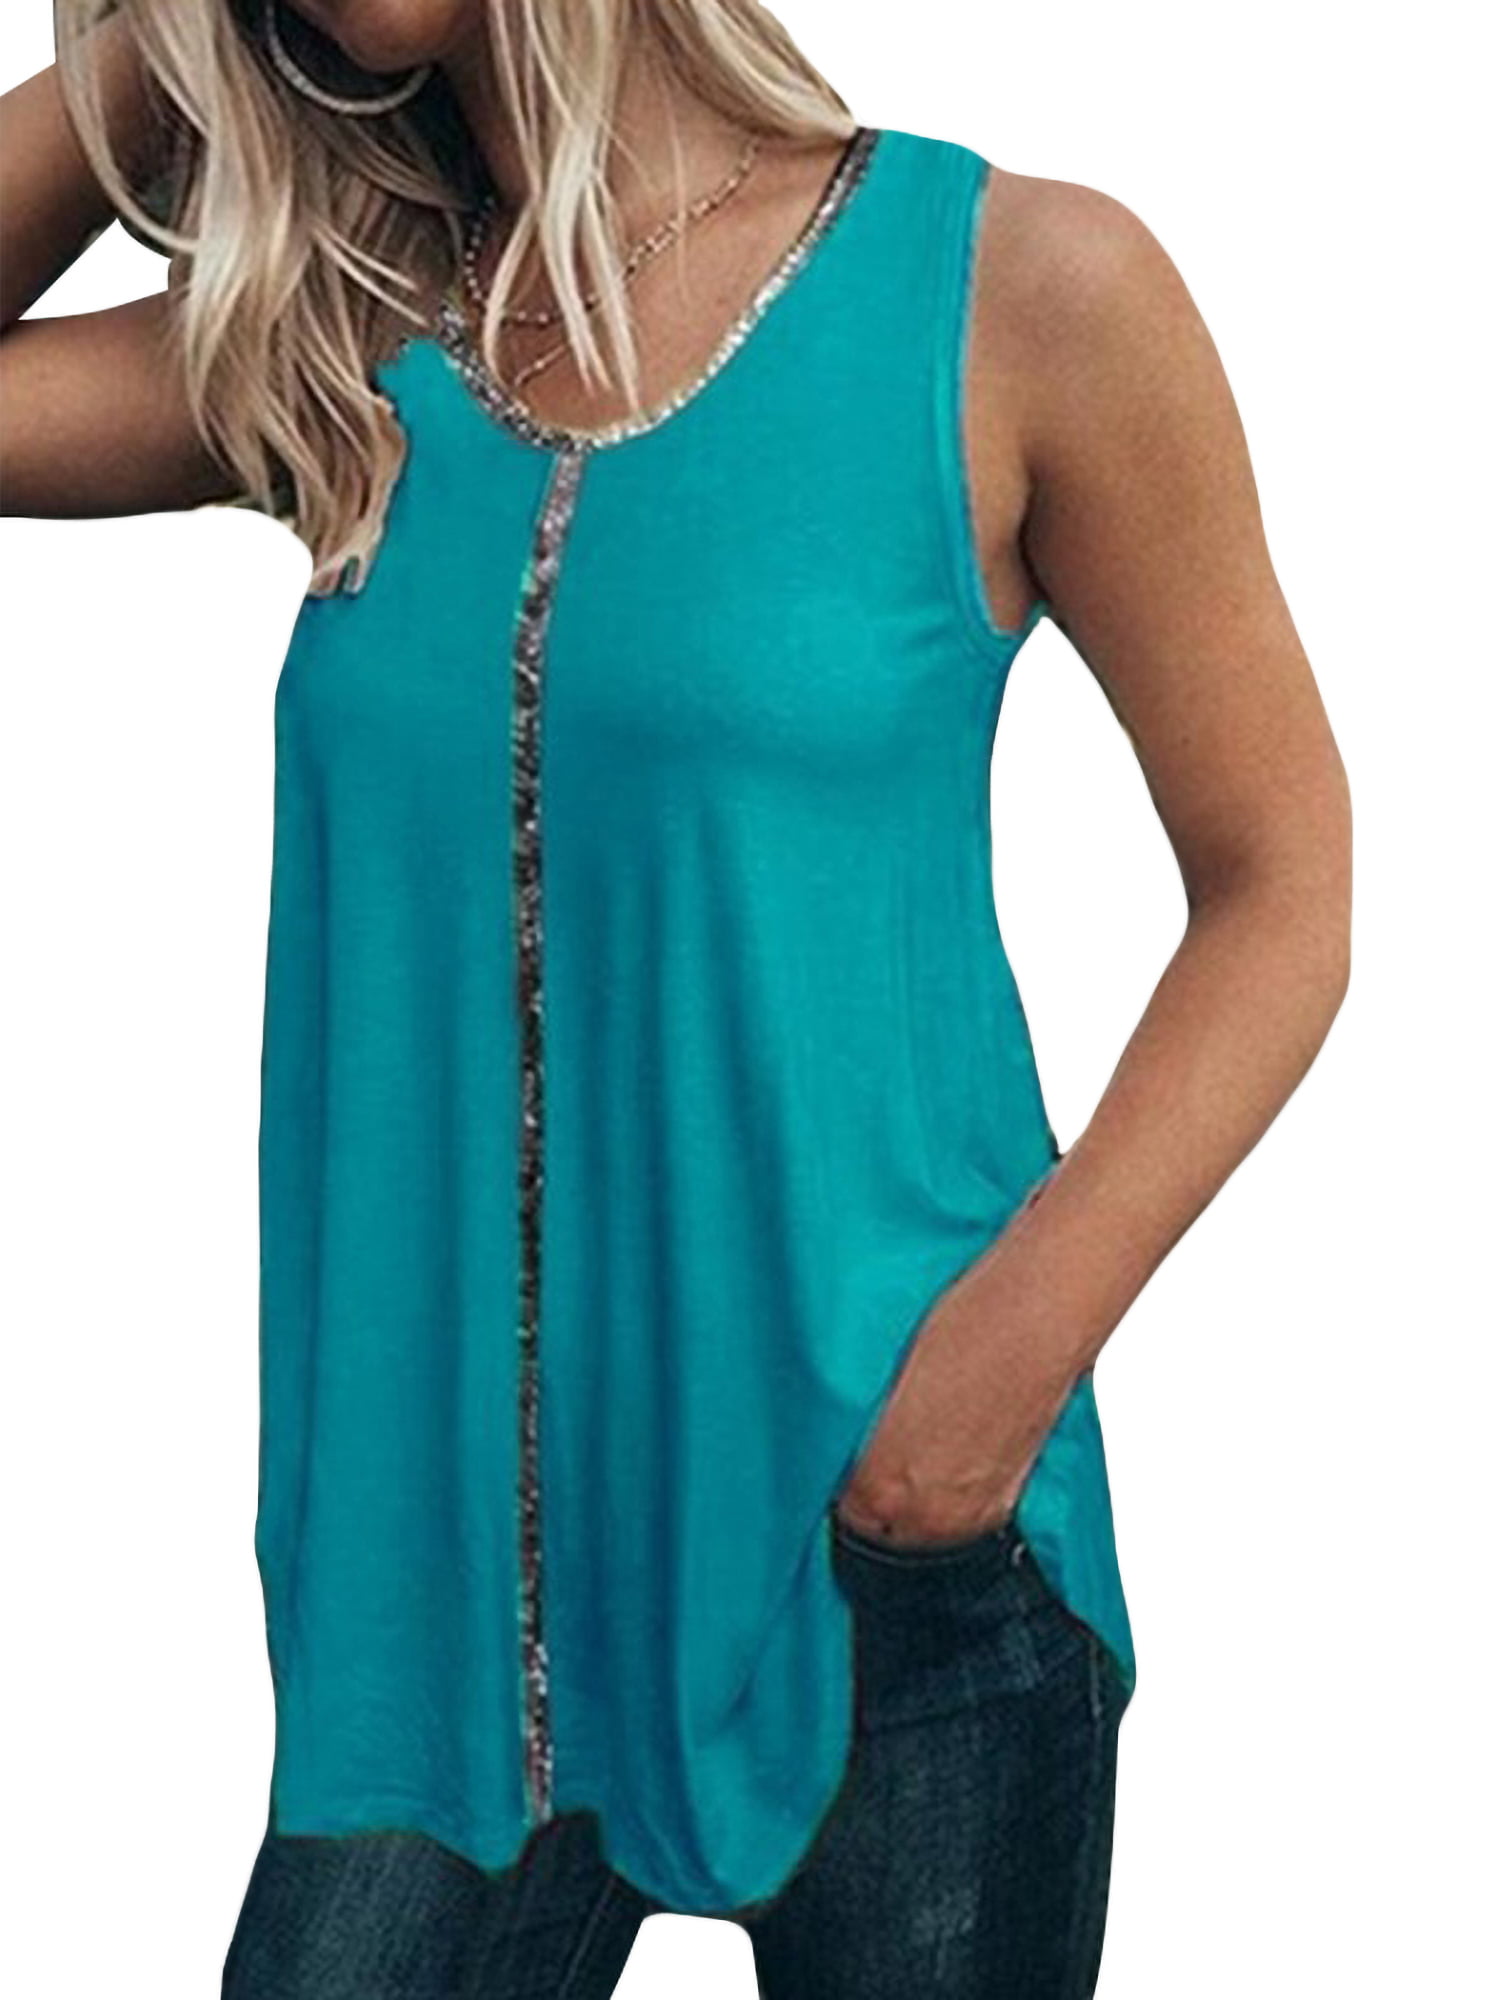 Fashion Sequins Plus Size V-Neck Summer Peated Flowy Tunics Cami Vest Blouse Halter Tank Tops for Women 